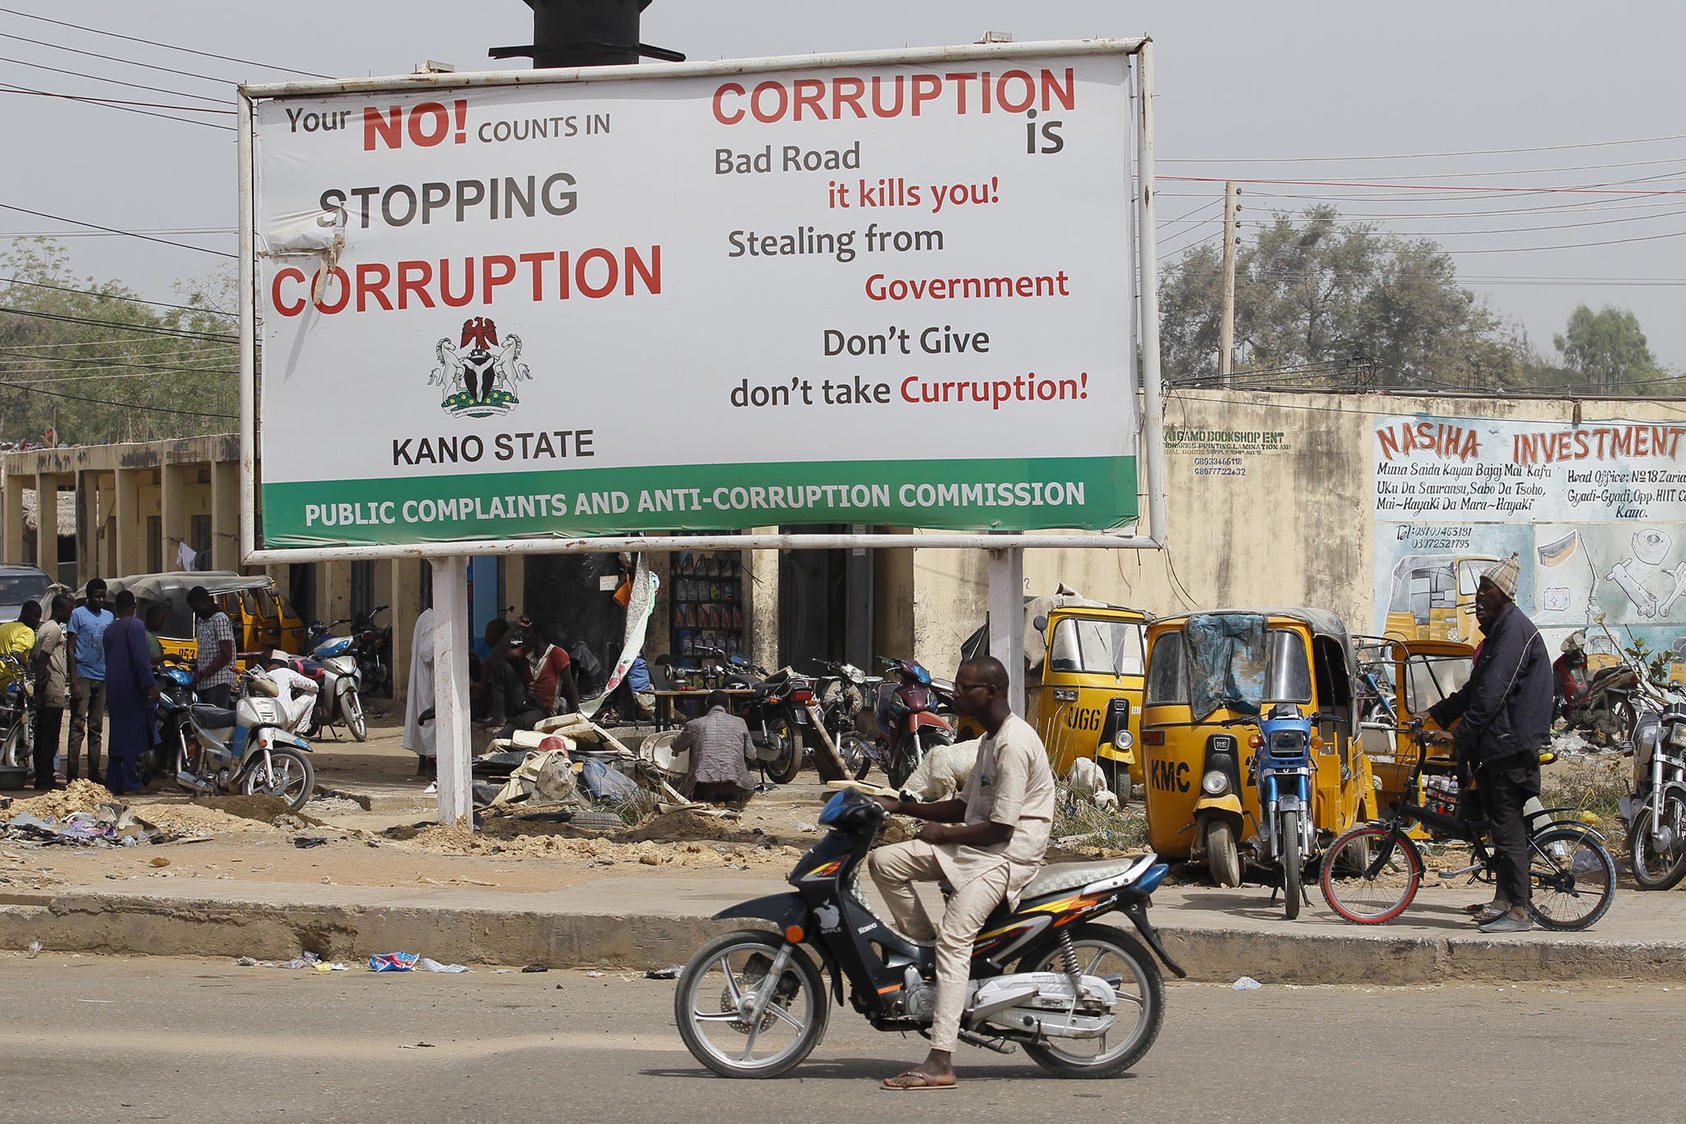 A majority of Nigerians believe they risk retaliation or other consequences when they report incidents of corruption. Anti-corruption activists and their organizations can help encourage safe reporting. (Akintunde Akinleye/Reuters)